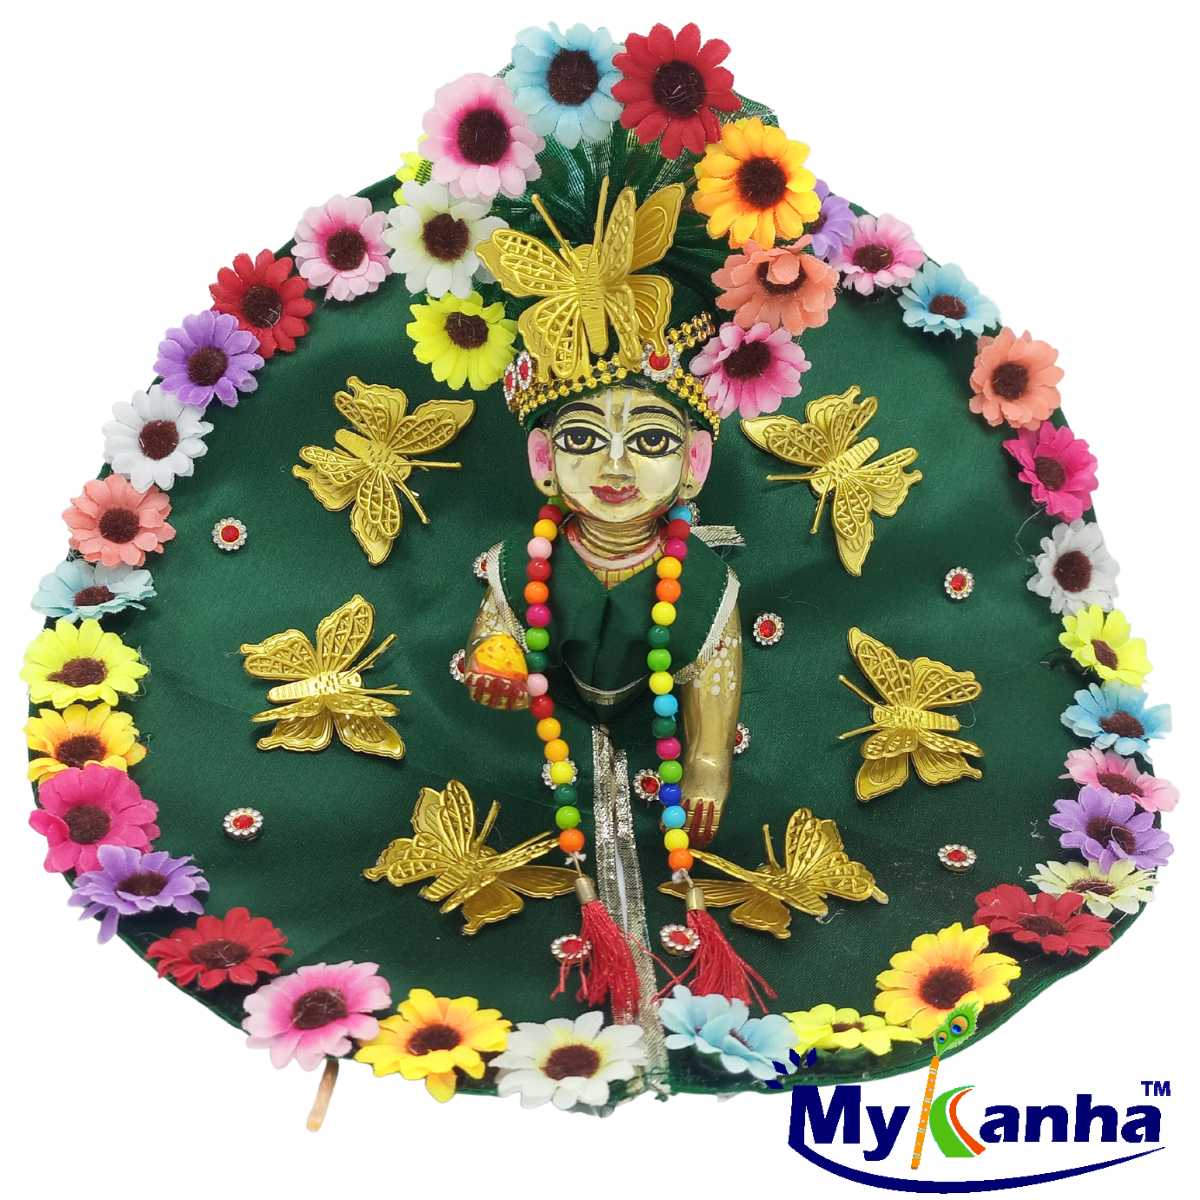 Flower and Butterfly decorated festival dress for Kanha Ji